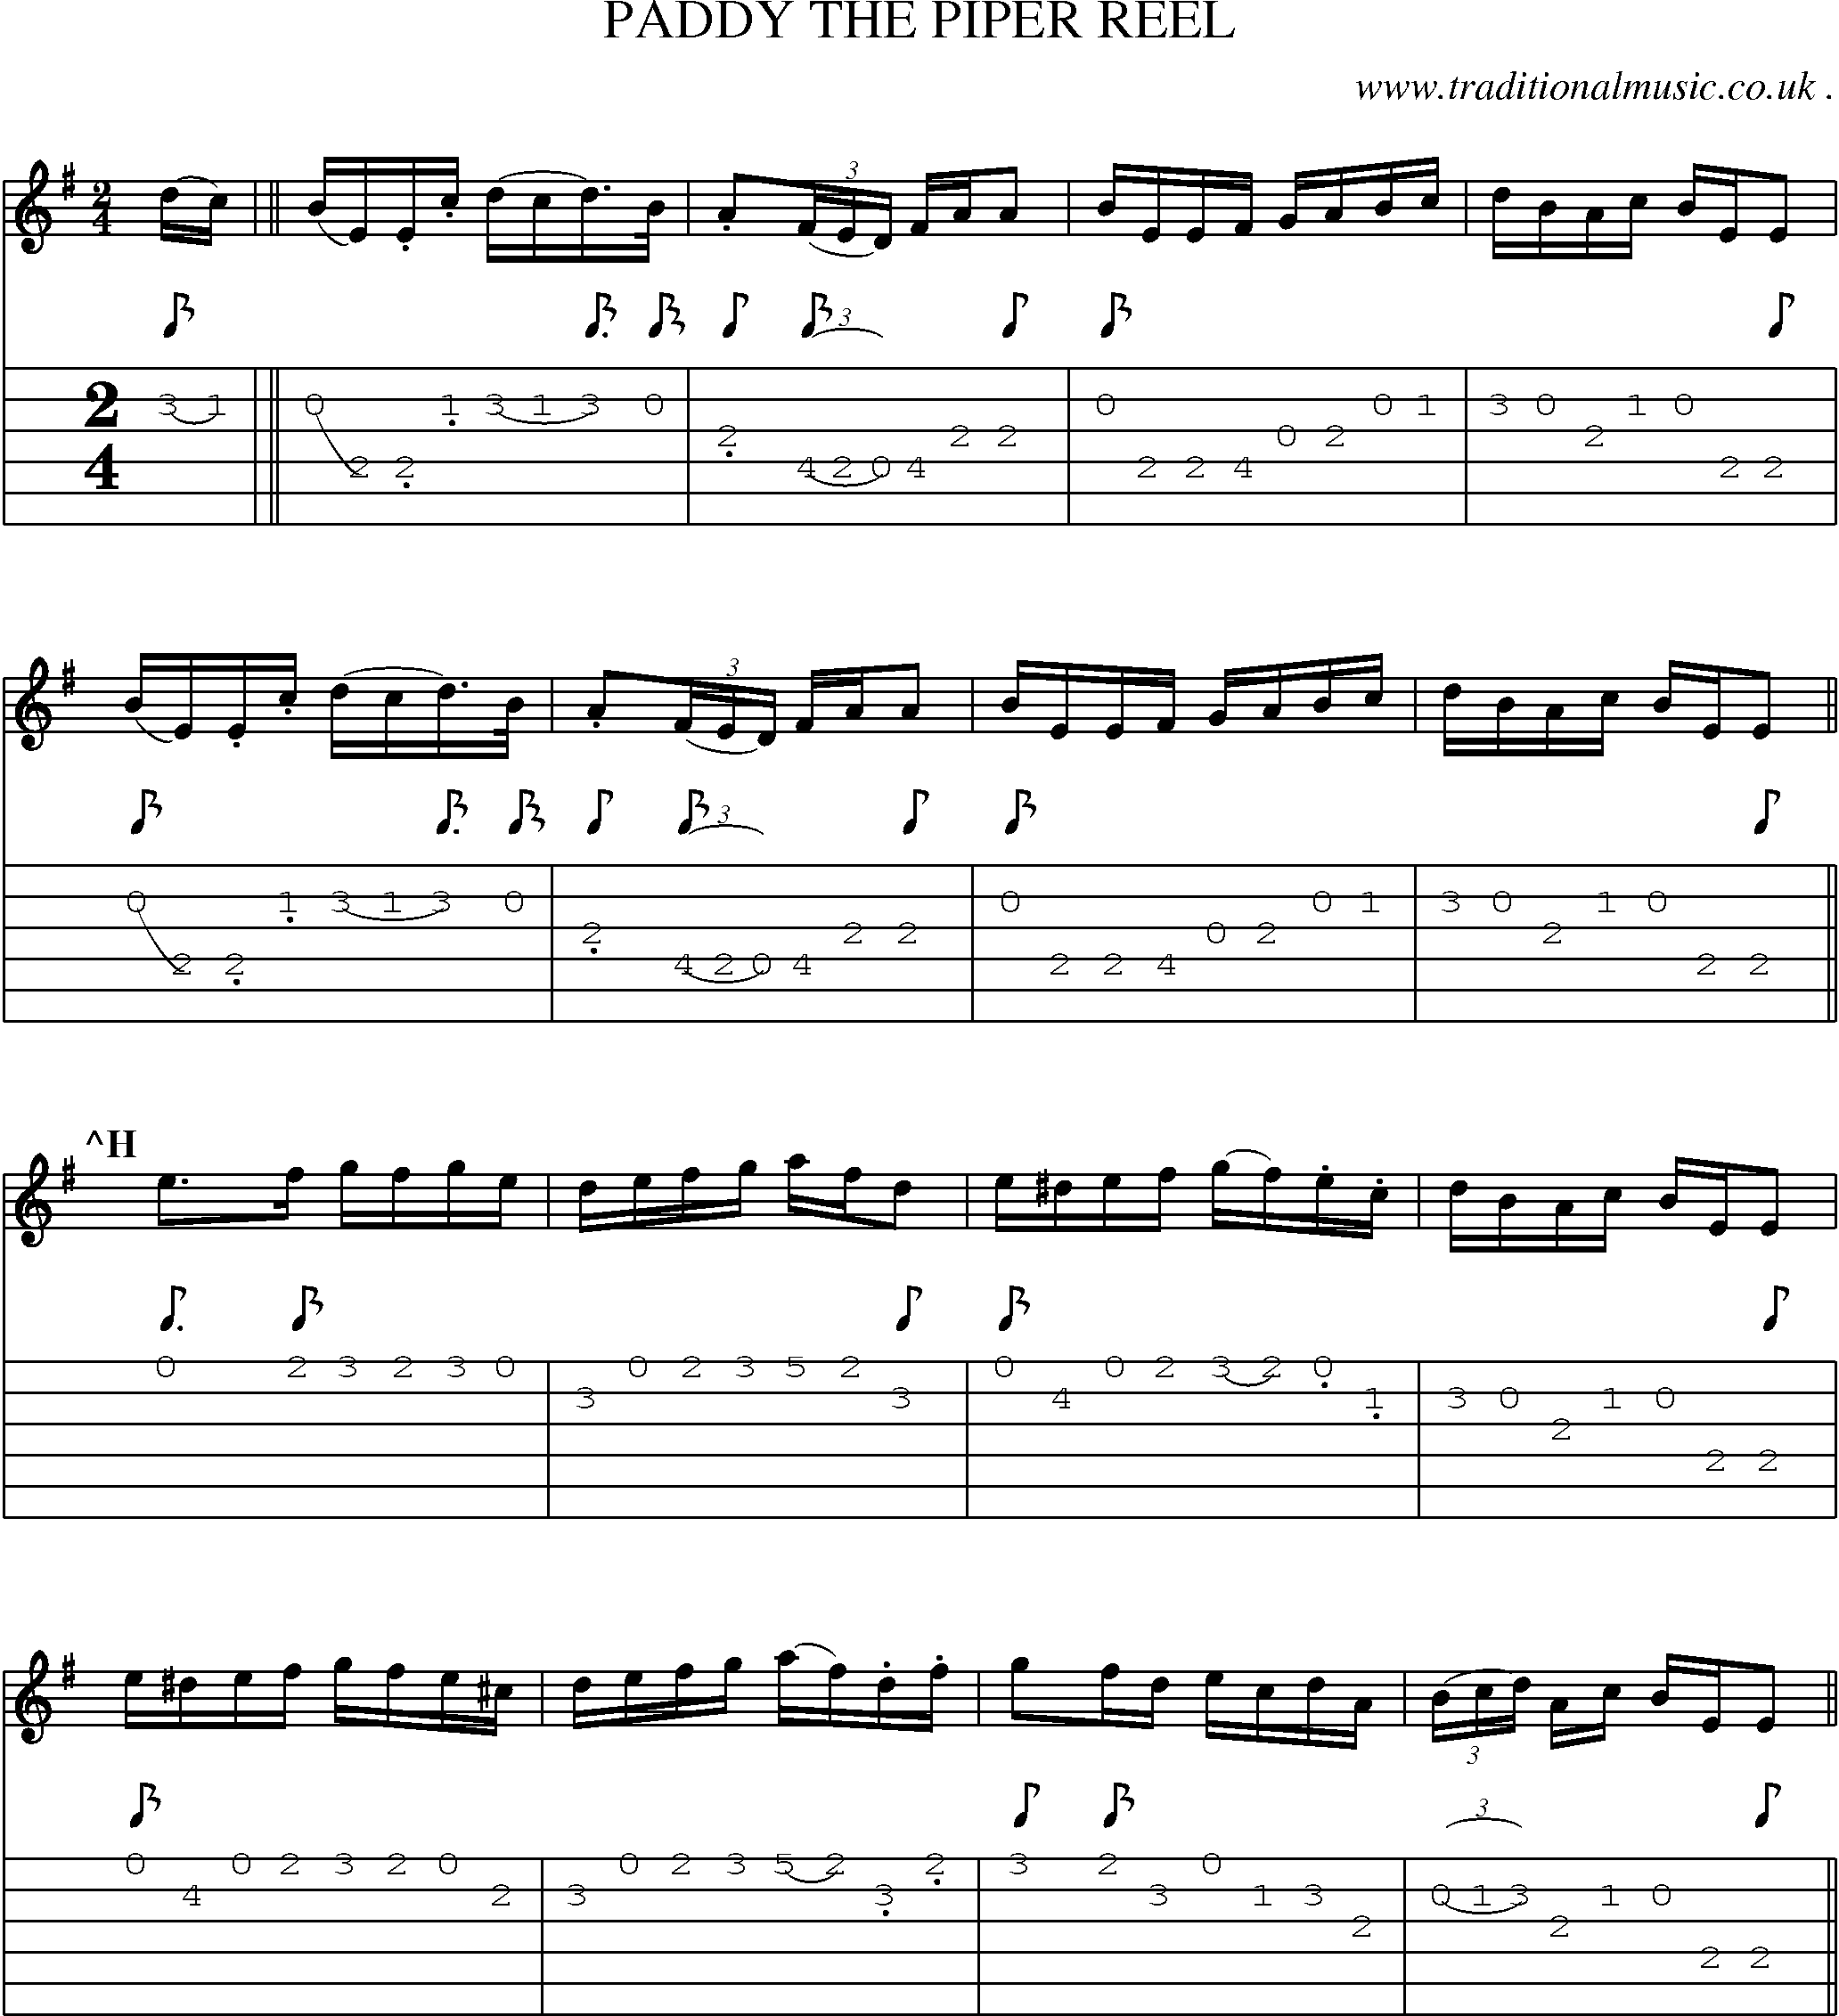 Sheet-Music and Guitar Tabs for Paddy The Piper Reel